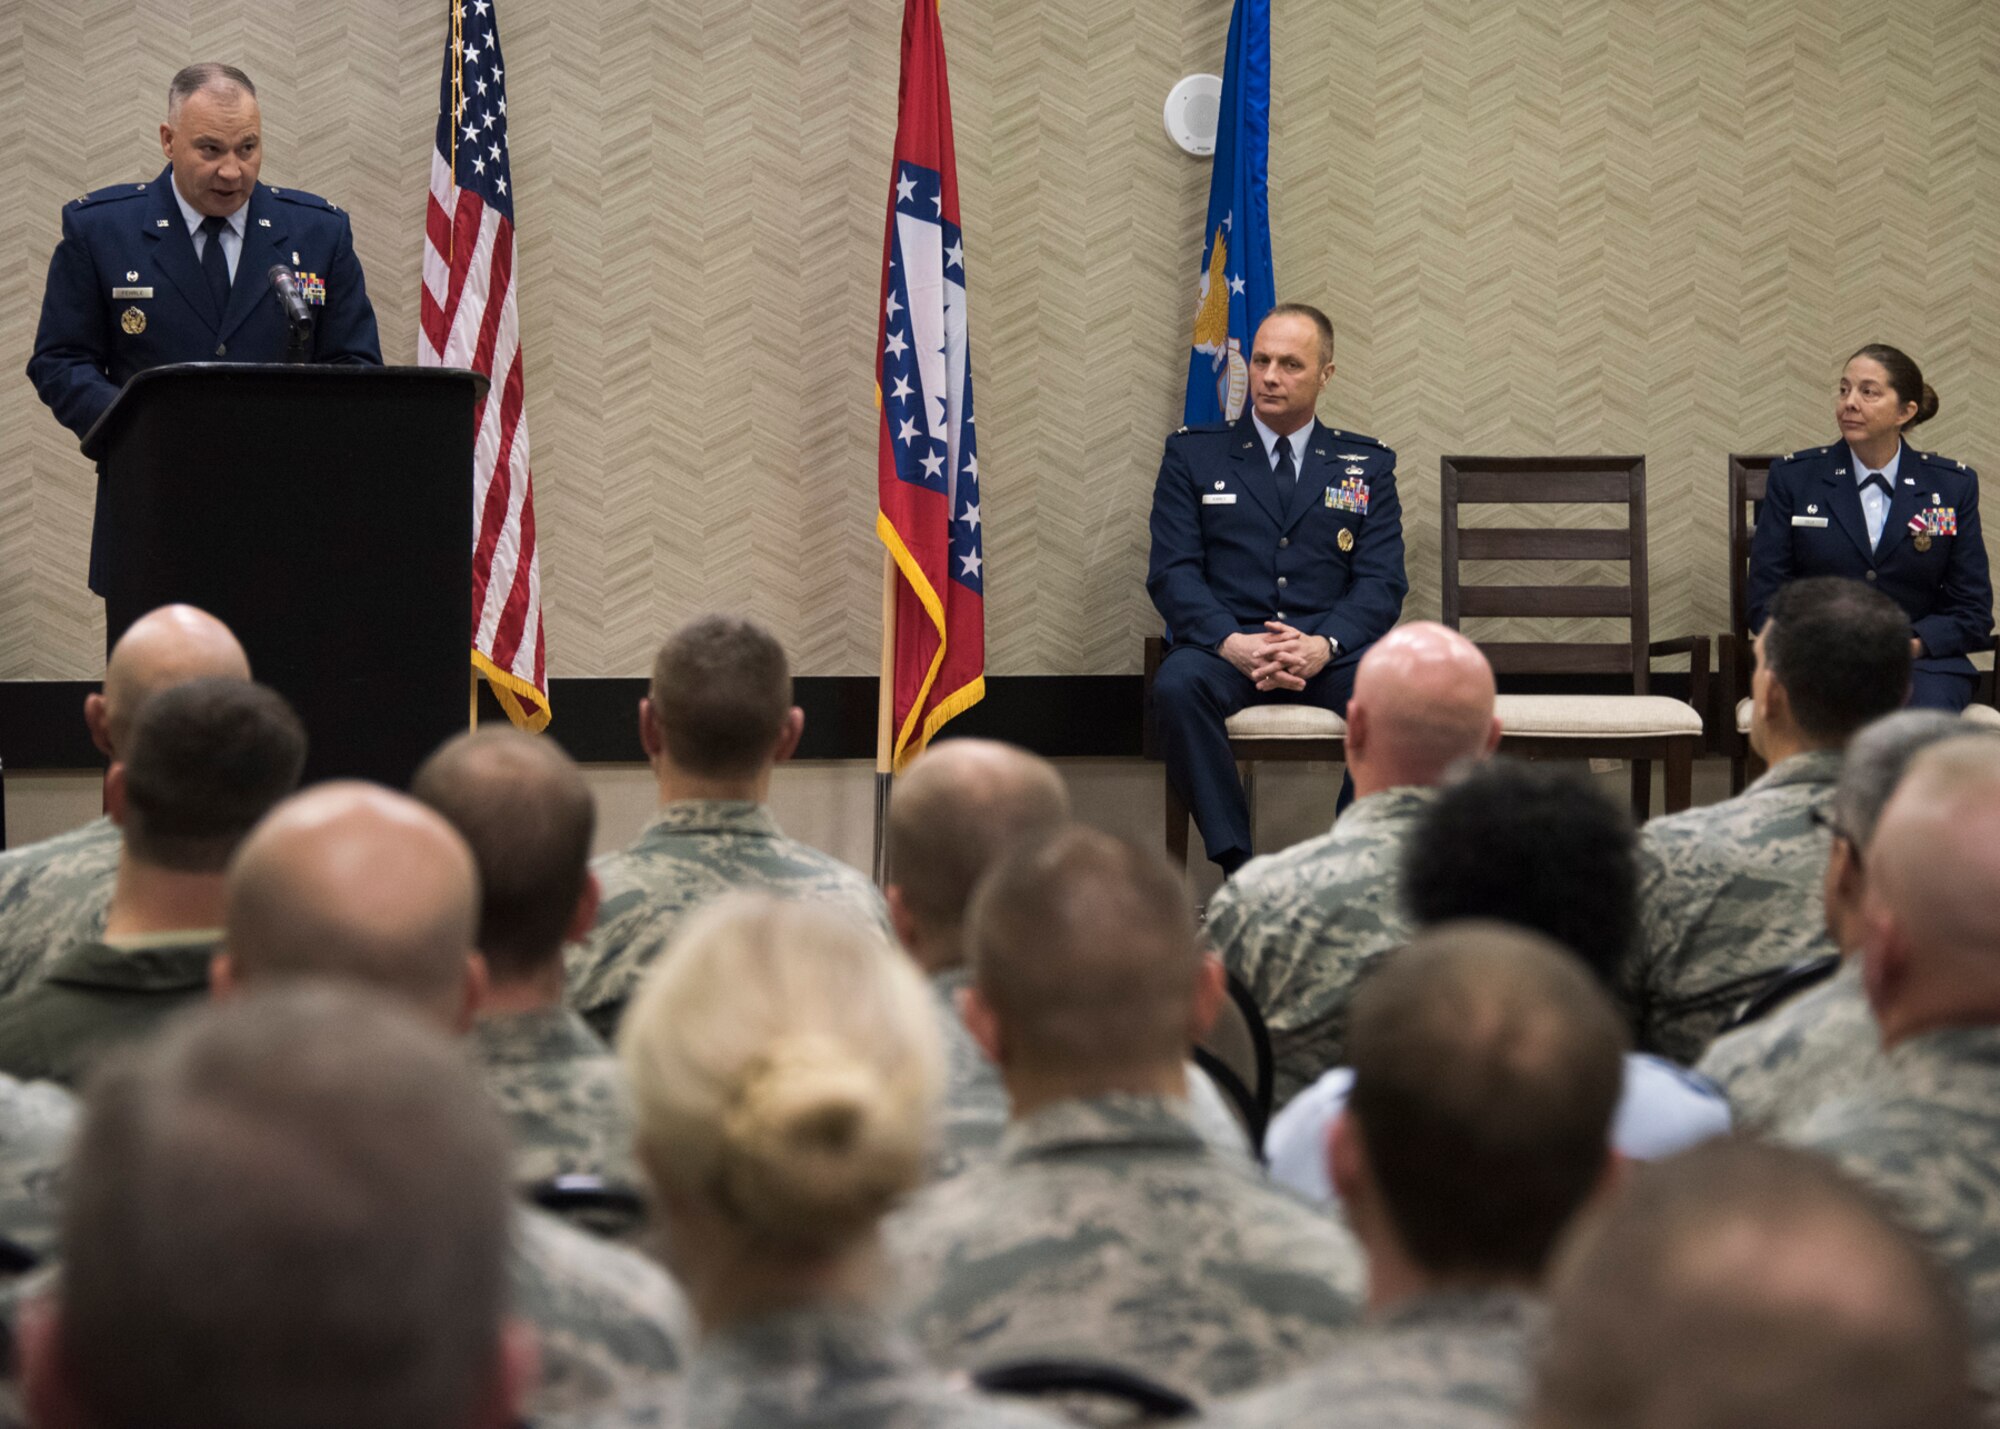 Col. Bret V. Fehrle, Commander 188th Medical Group, addresses audience members after assuming command as Col. Robert I. Kinney, Commander 188th Wing and Col. Misty M. Zelk, former commander 188th Medical Group look on at Fort Smith, AR., Dec. 02, 2017. (U.S. Air National Guard photo by Tech. Sgt. Daniel Condit)